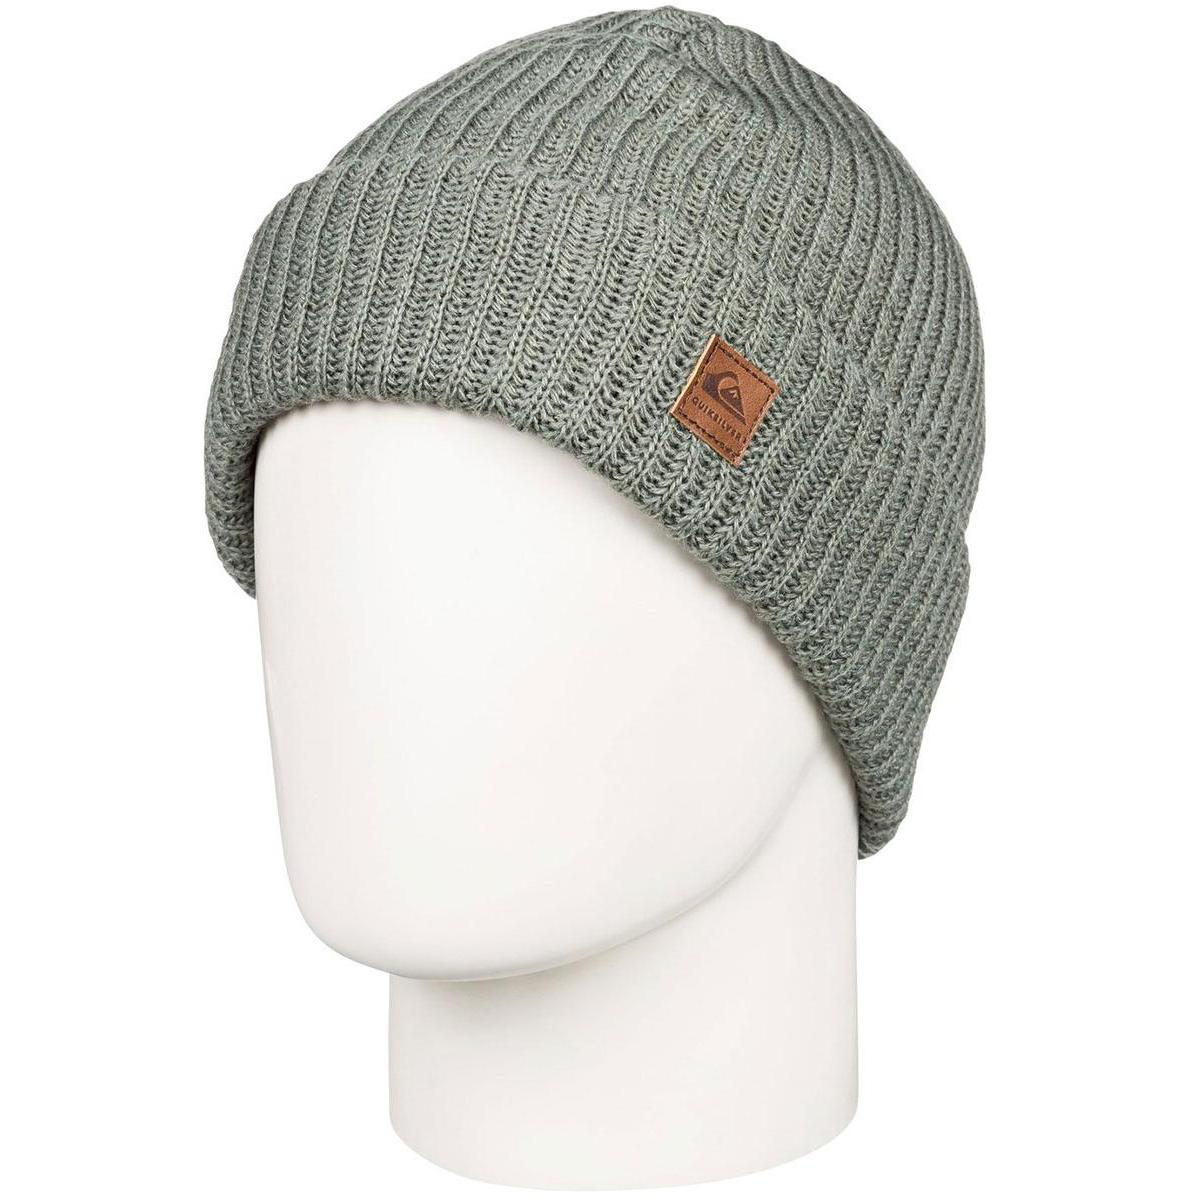 Шапка Quiksilver 2019-20 Routine Beanie Agave green